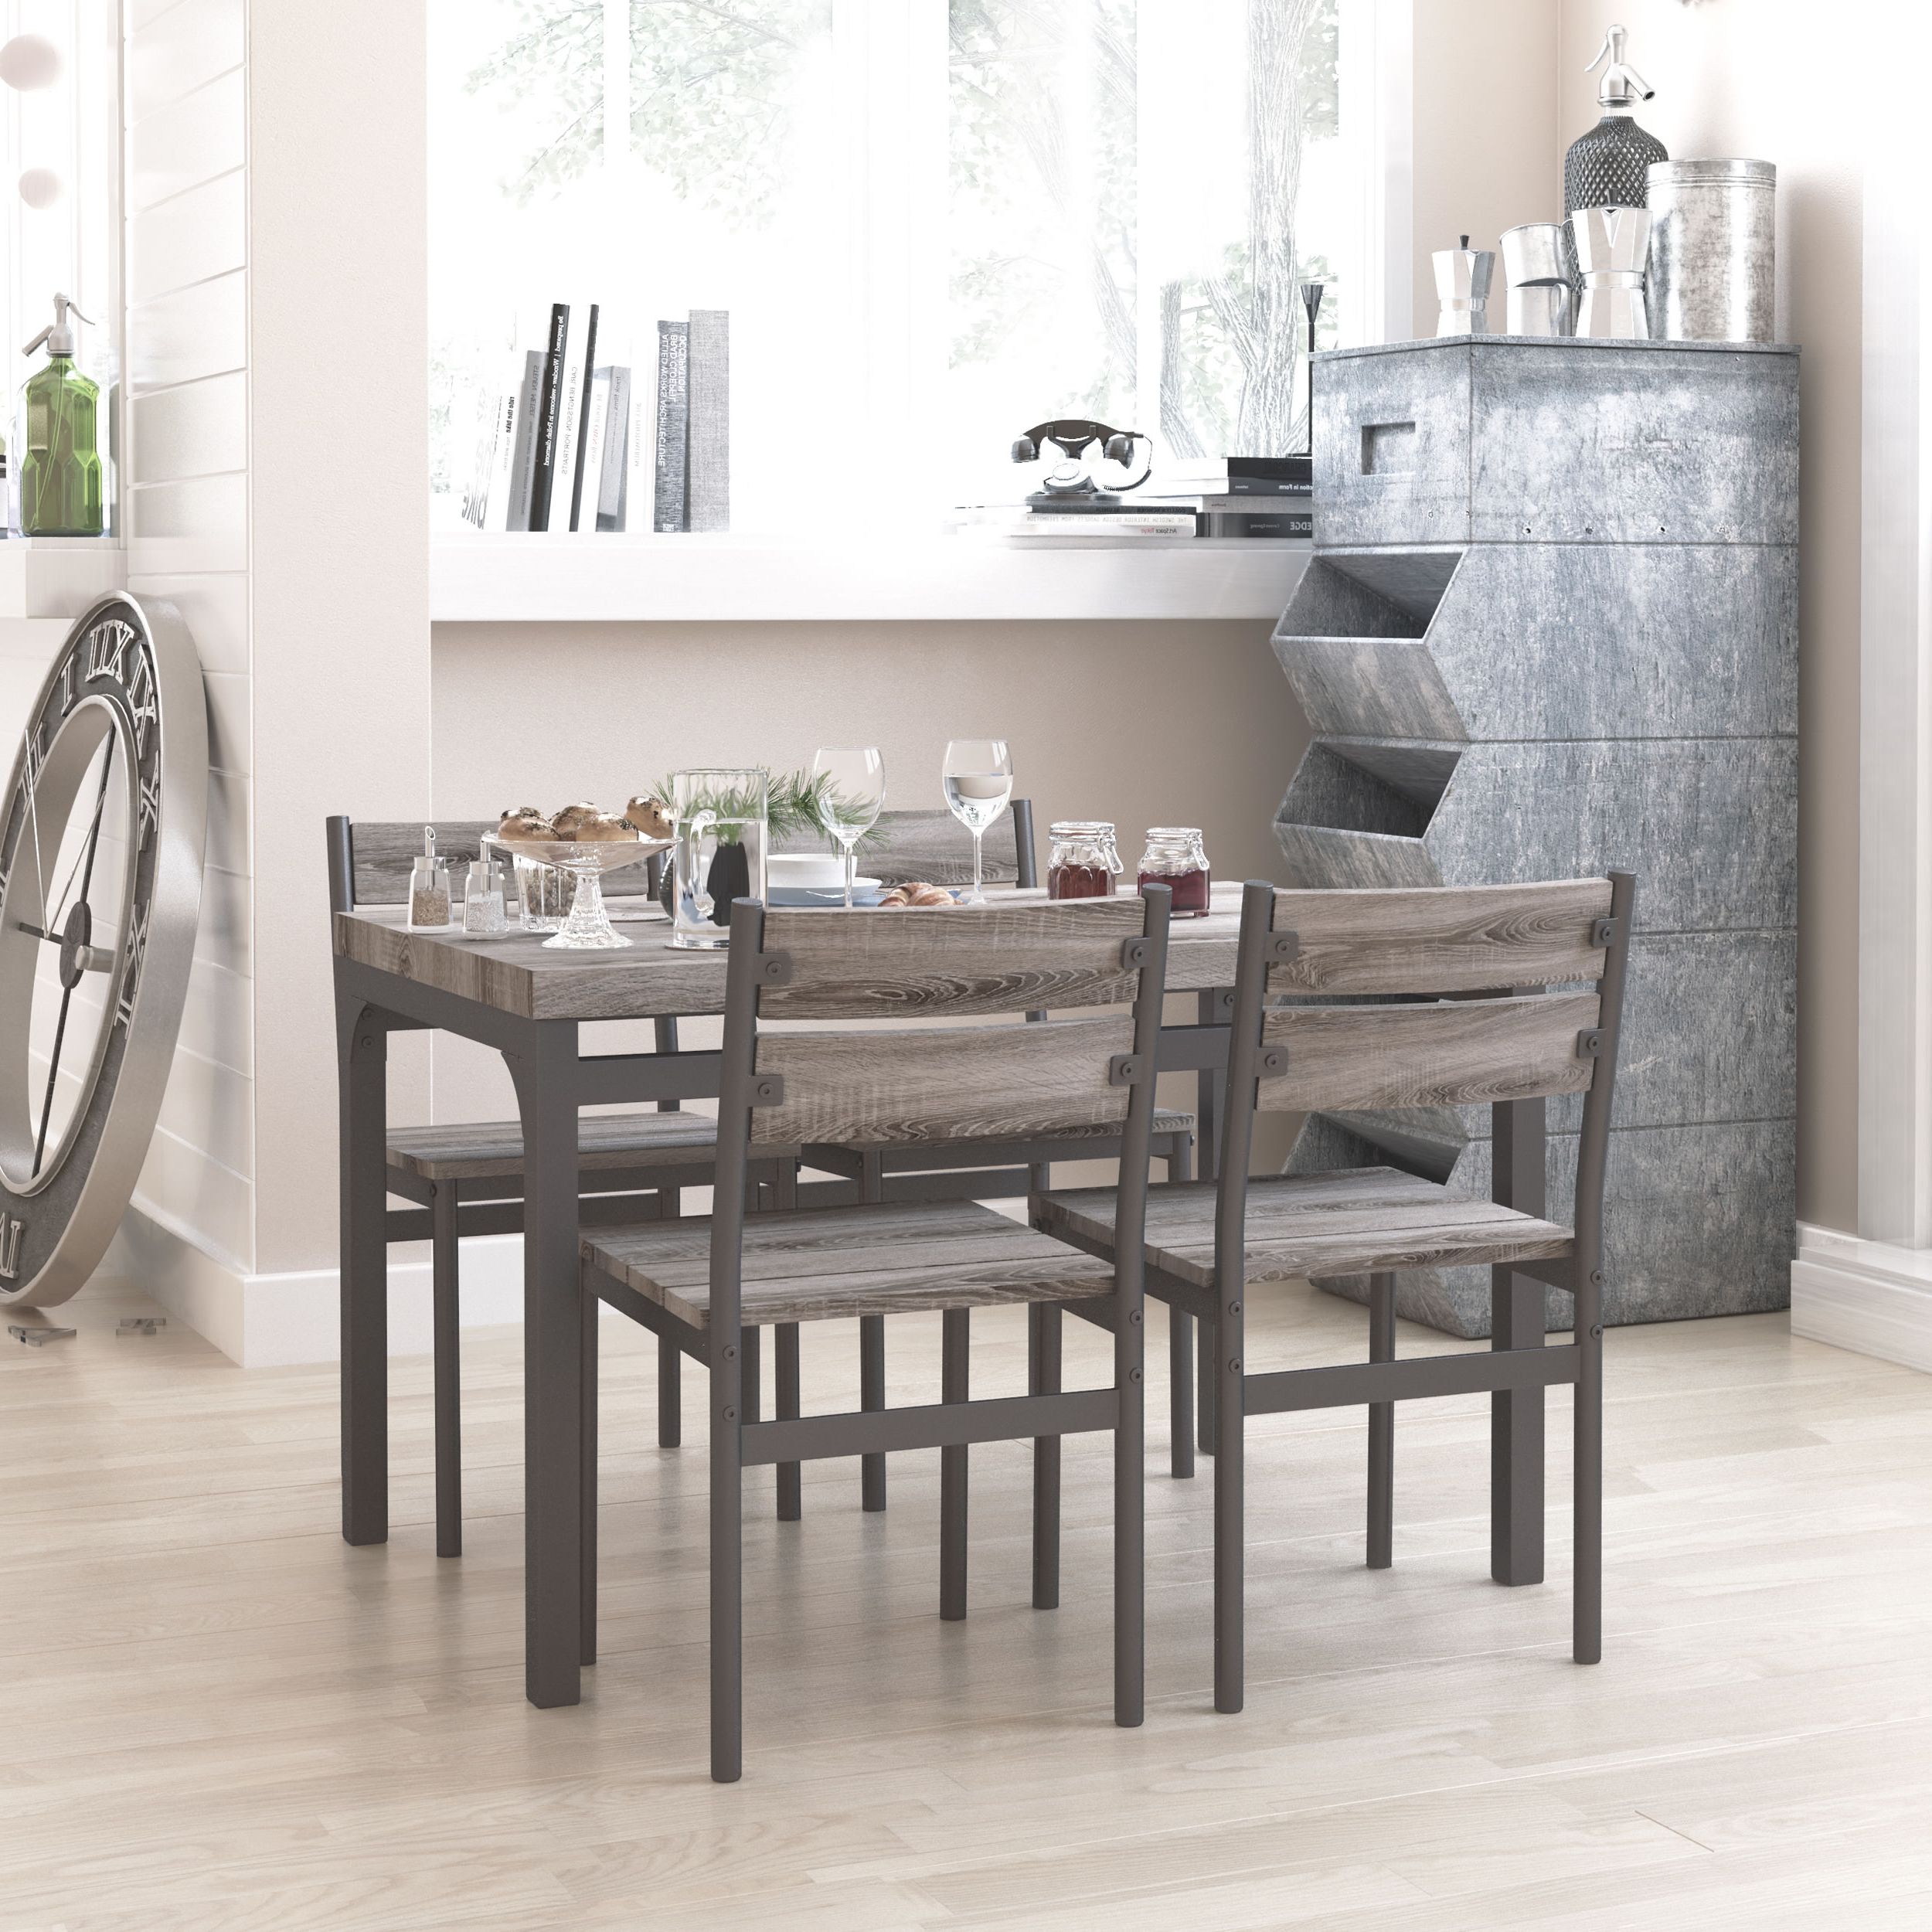 Widely Used Gray Dining Tables In Zenvida 5 Piece Dining Set Rustic Grey Wooden Kitchen (View 10 of 20)